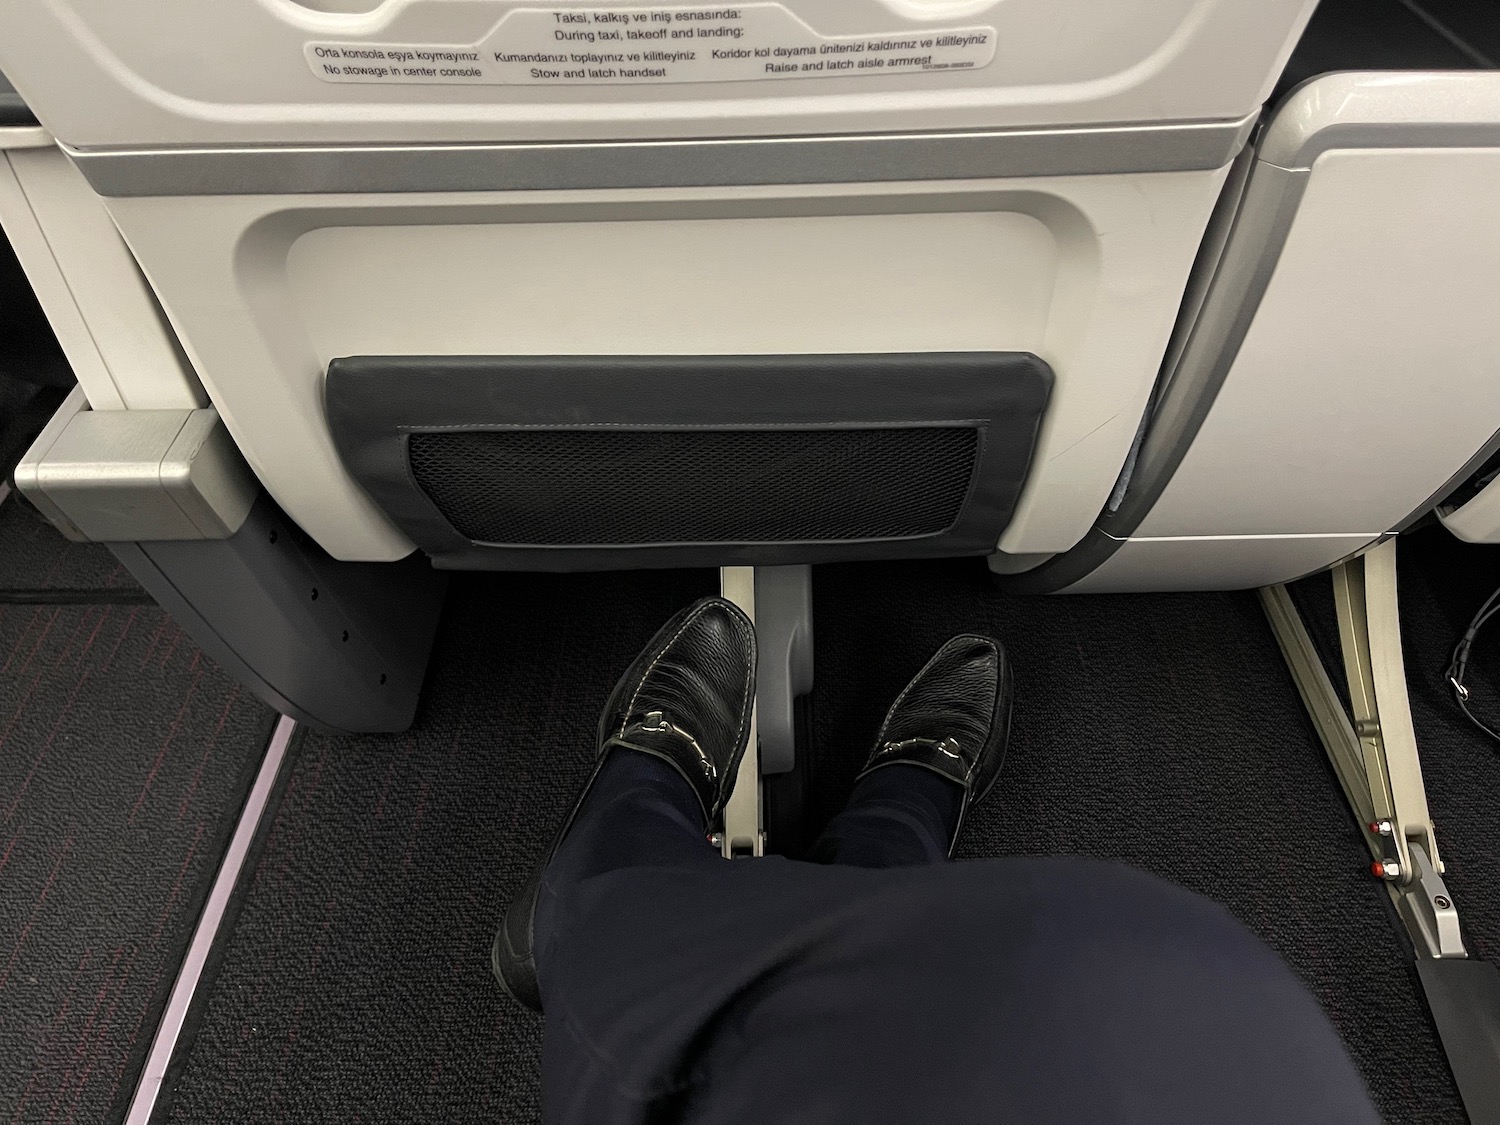 a person's feet in a plane